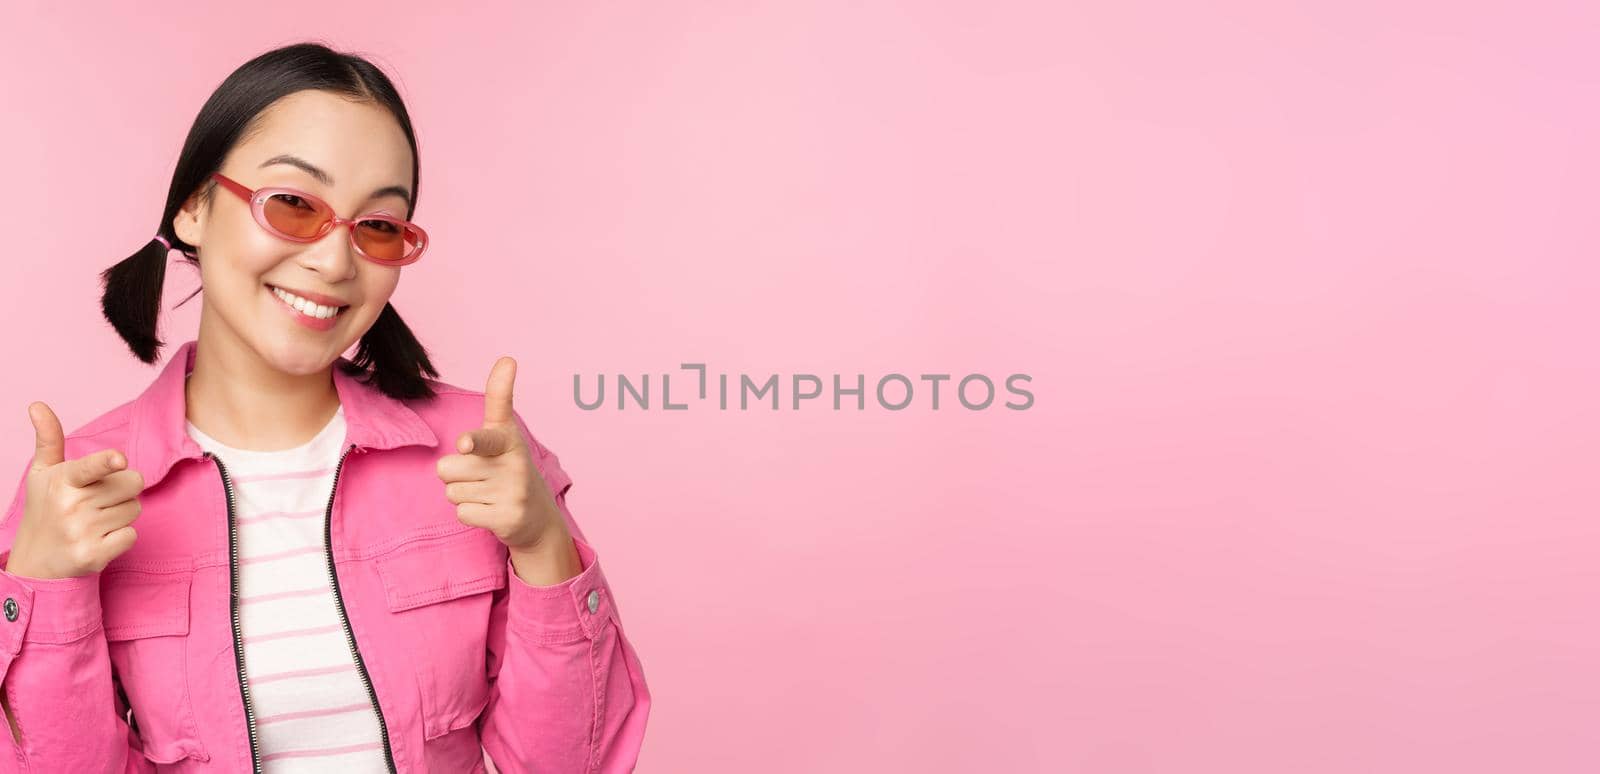 Close up portrait of modern asian girl in sunglasses smiling, pointing fingers at camera, praise you, inviting or complimenting, standing over pink background.